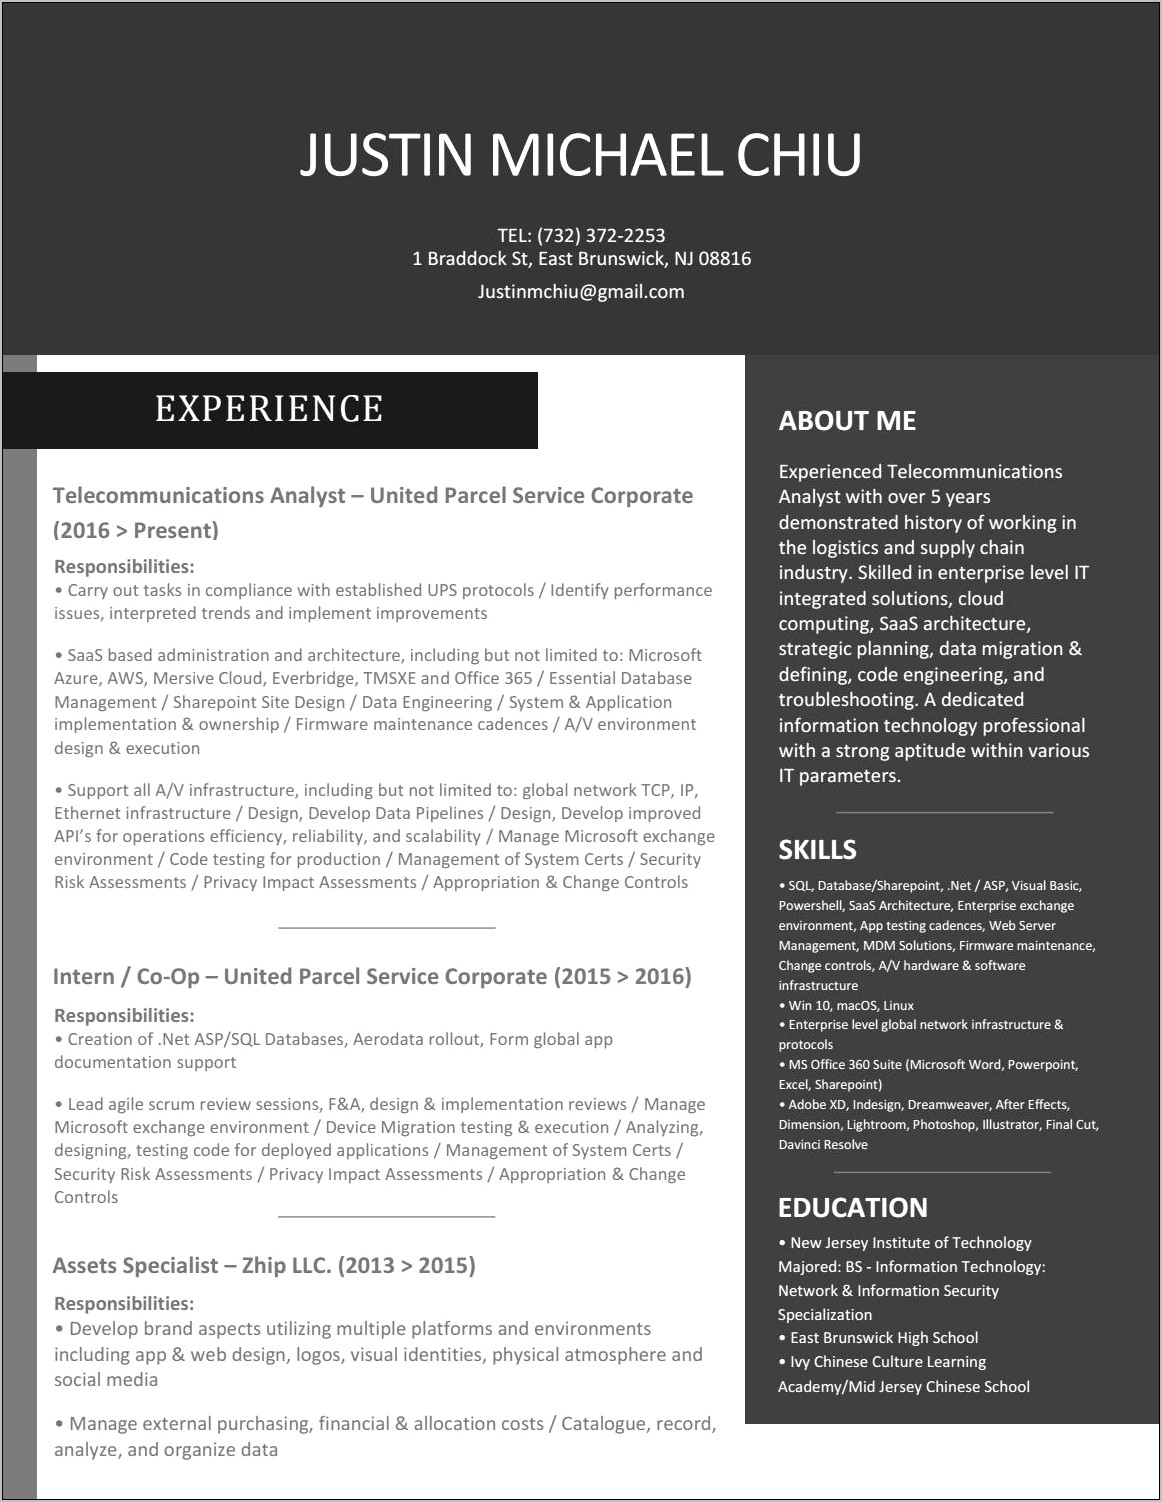 Experience On Exchange And O365 Resume